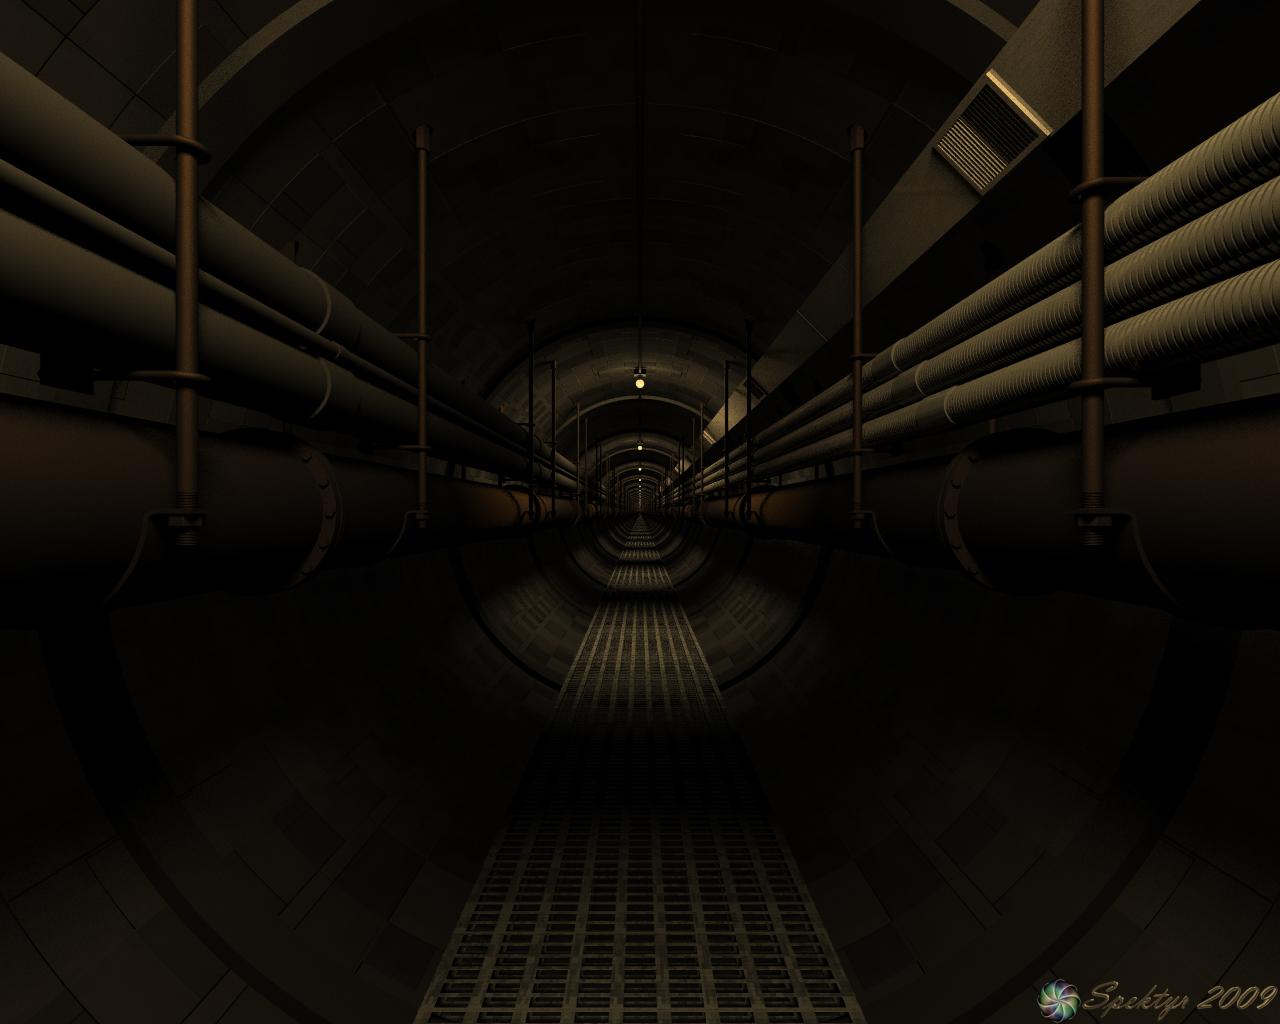 Dark Tunnel with Soft Shadows (Fixed)